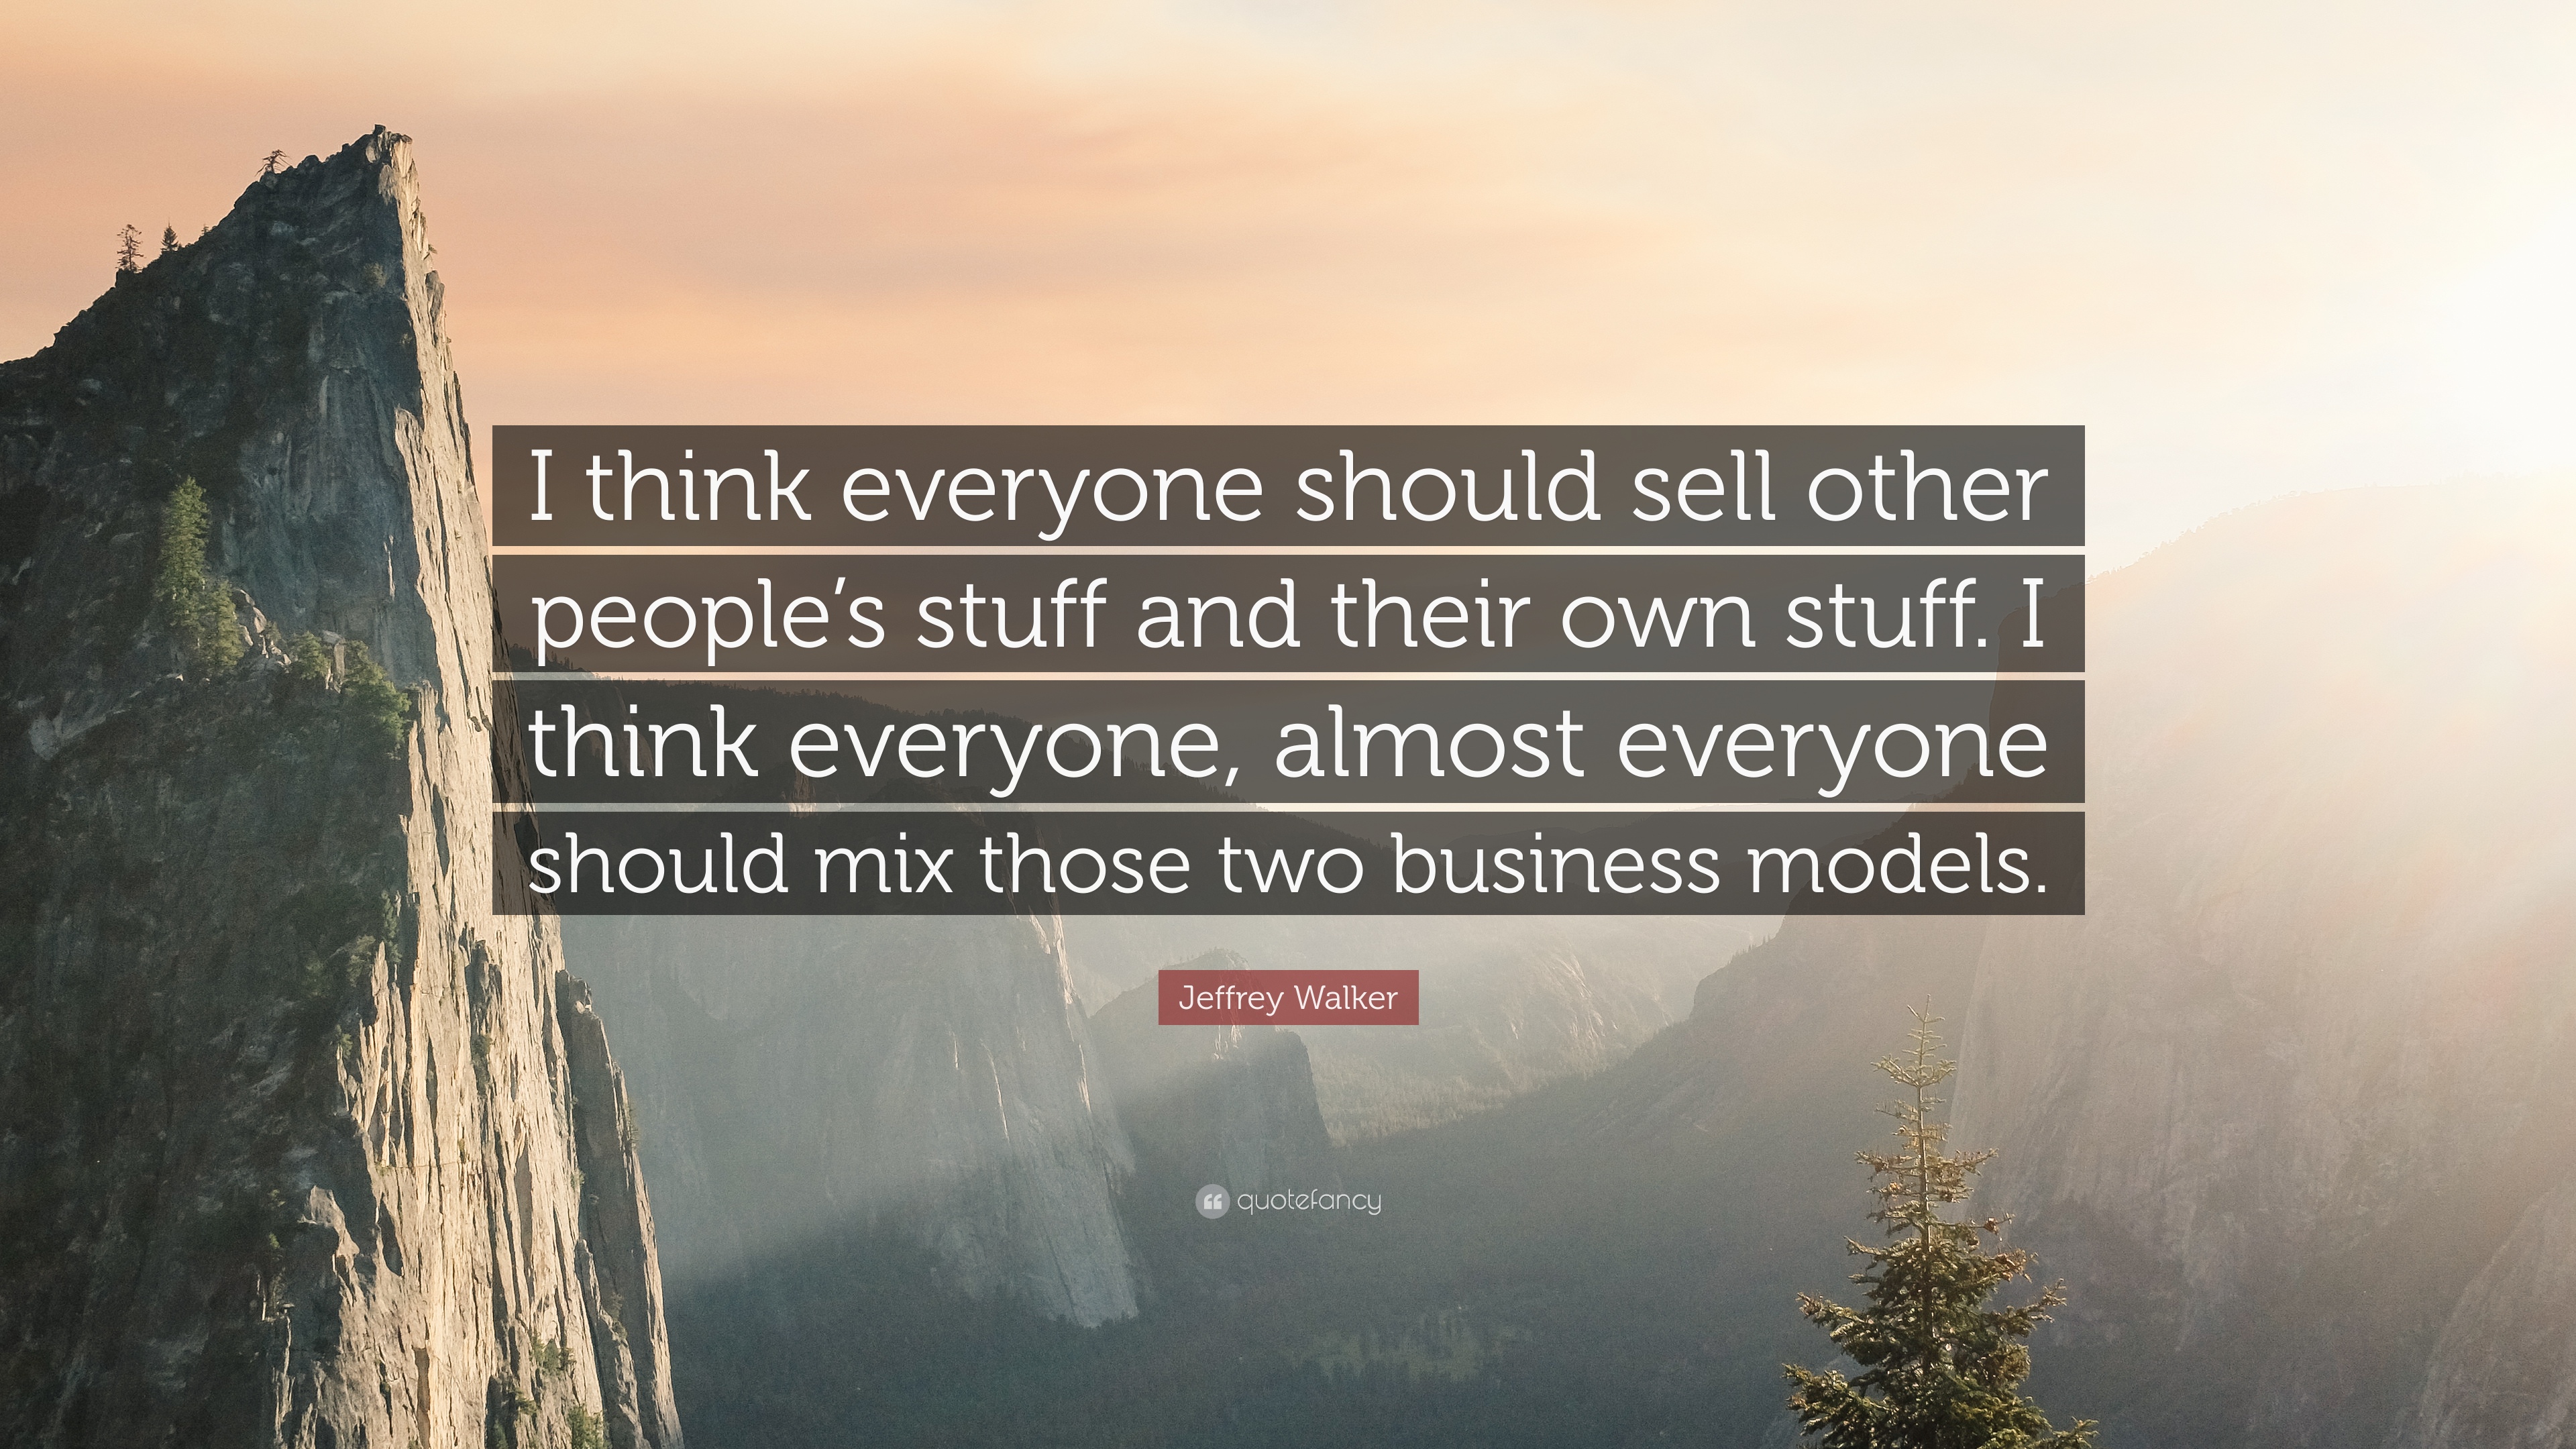 Jeffrey walker quote âi think everyone should sell other peoples stuff and their own stuff i think everyone almost everyone should mix thosâ